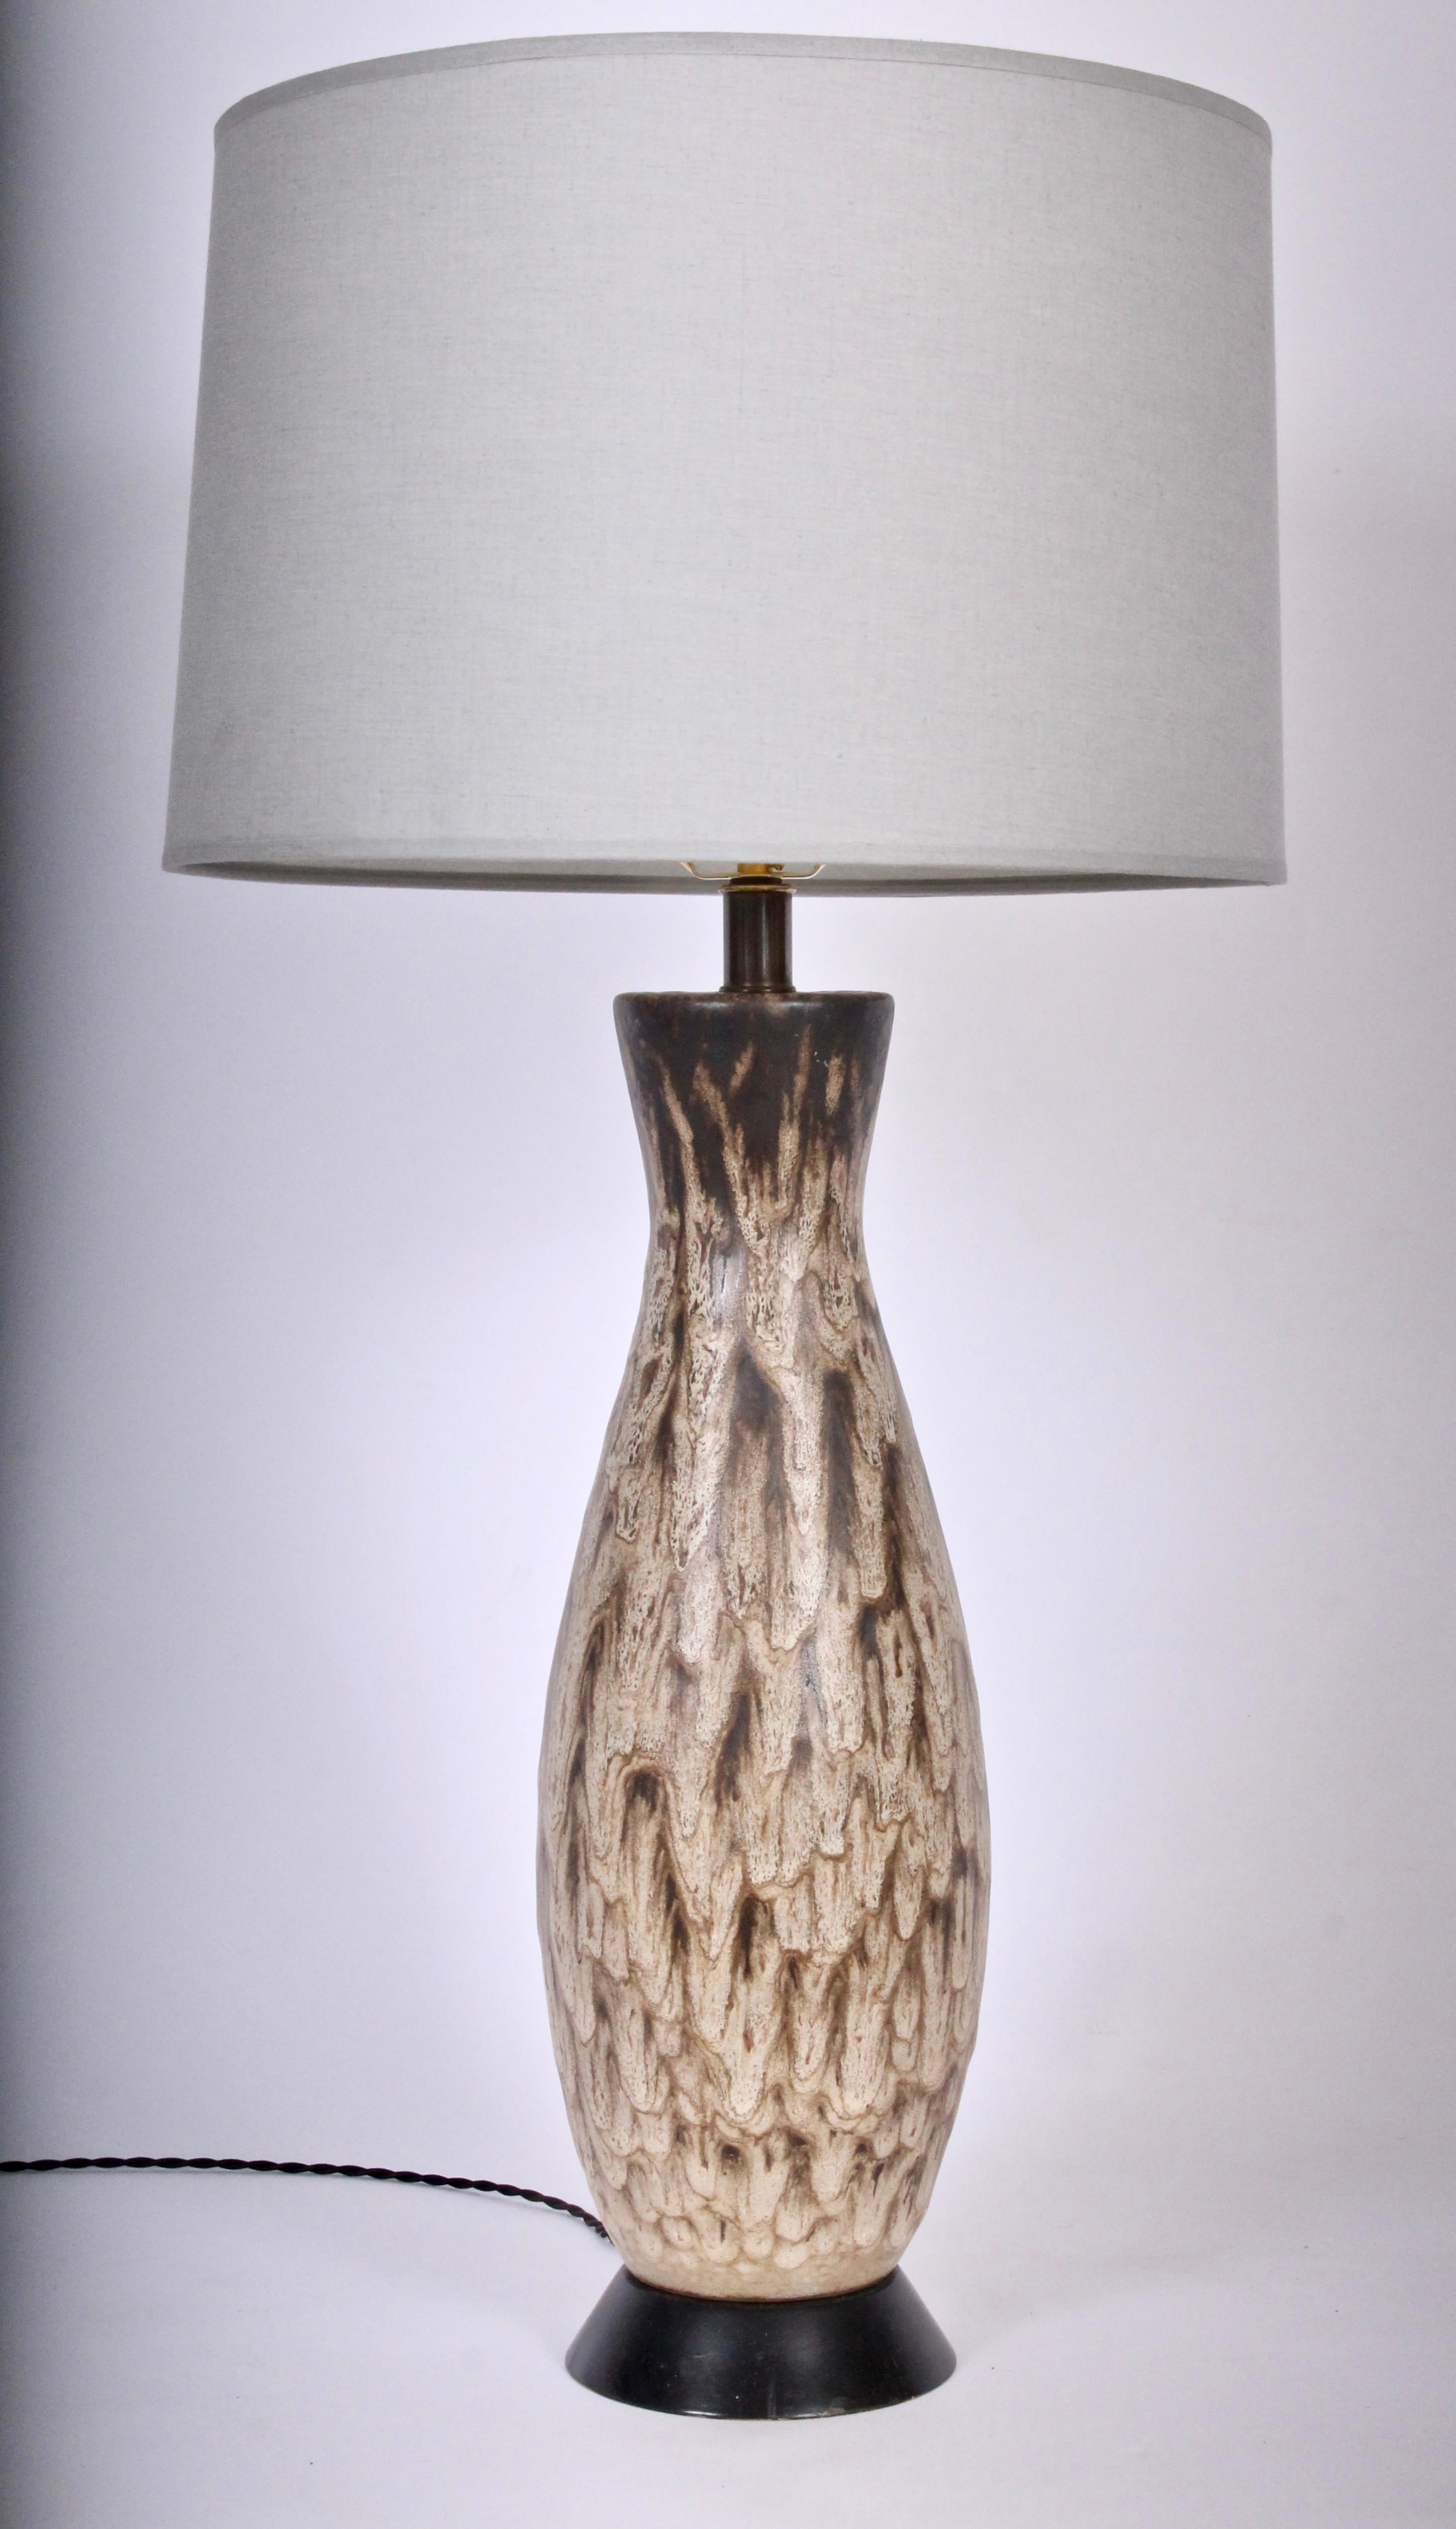 Tall Design Technics Mottled Taupe Drip Glaze Art Pottery Table Lamp, 1960's For Sale 1